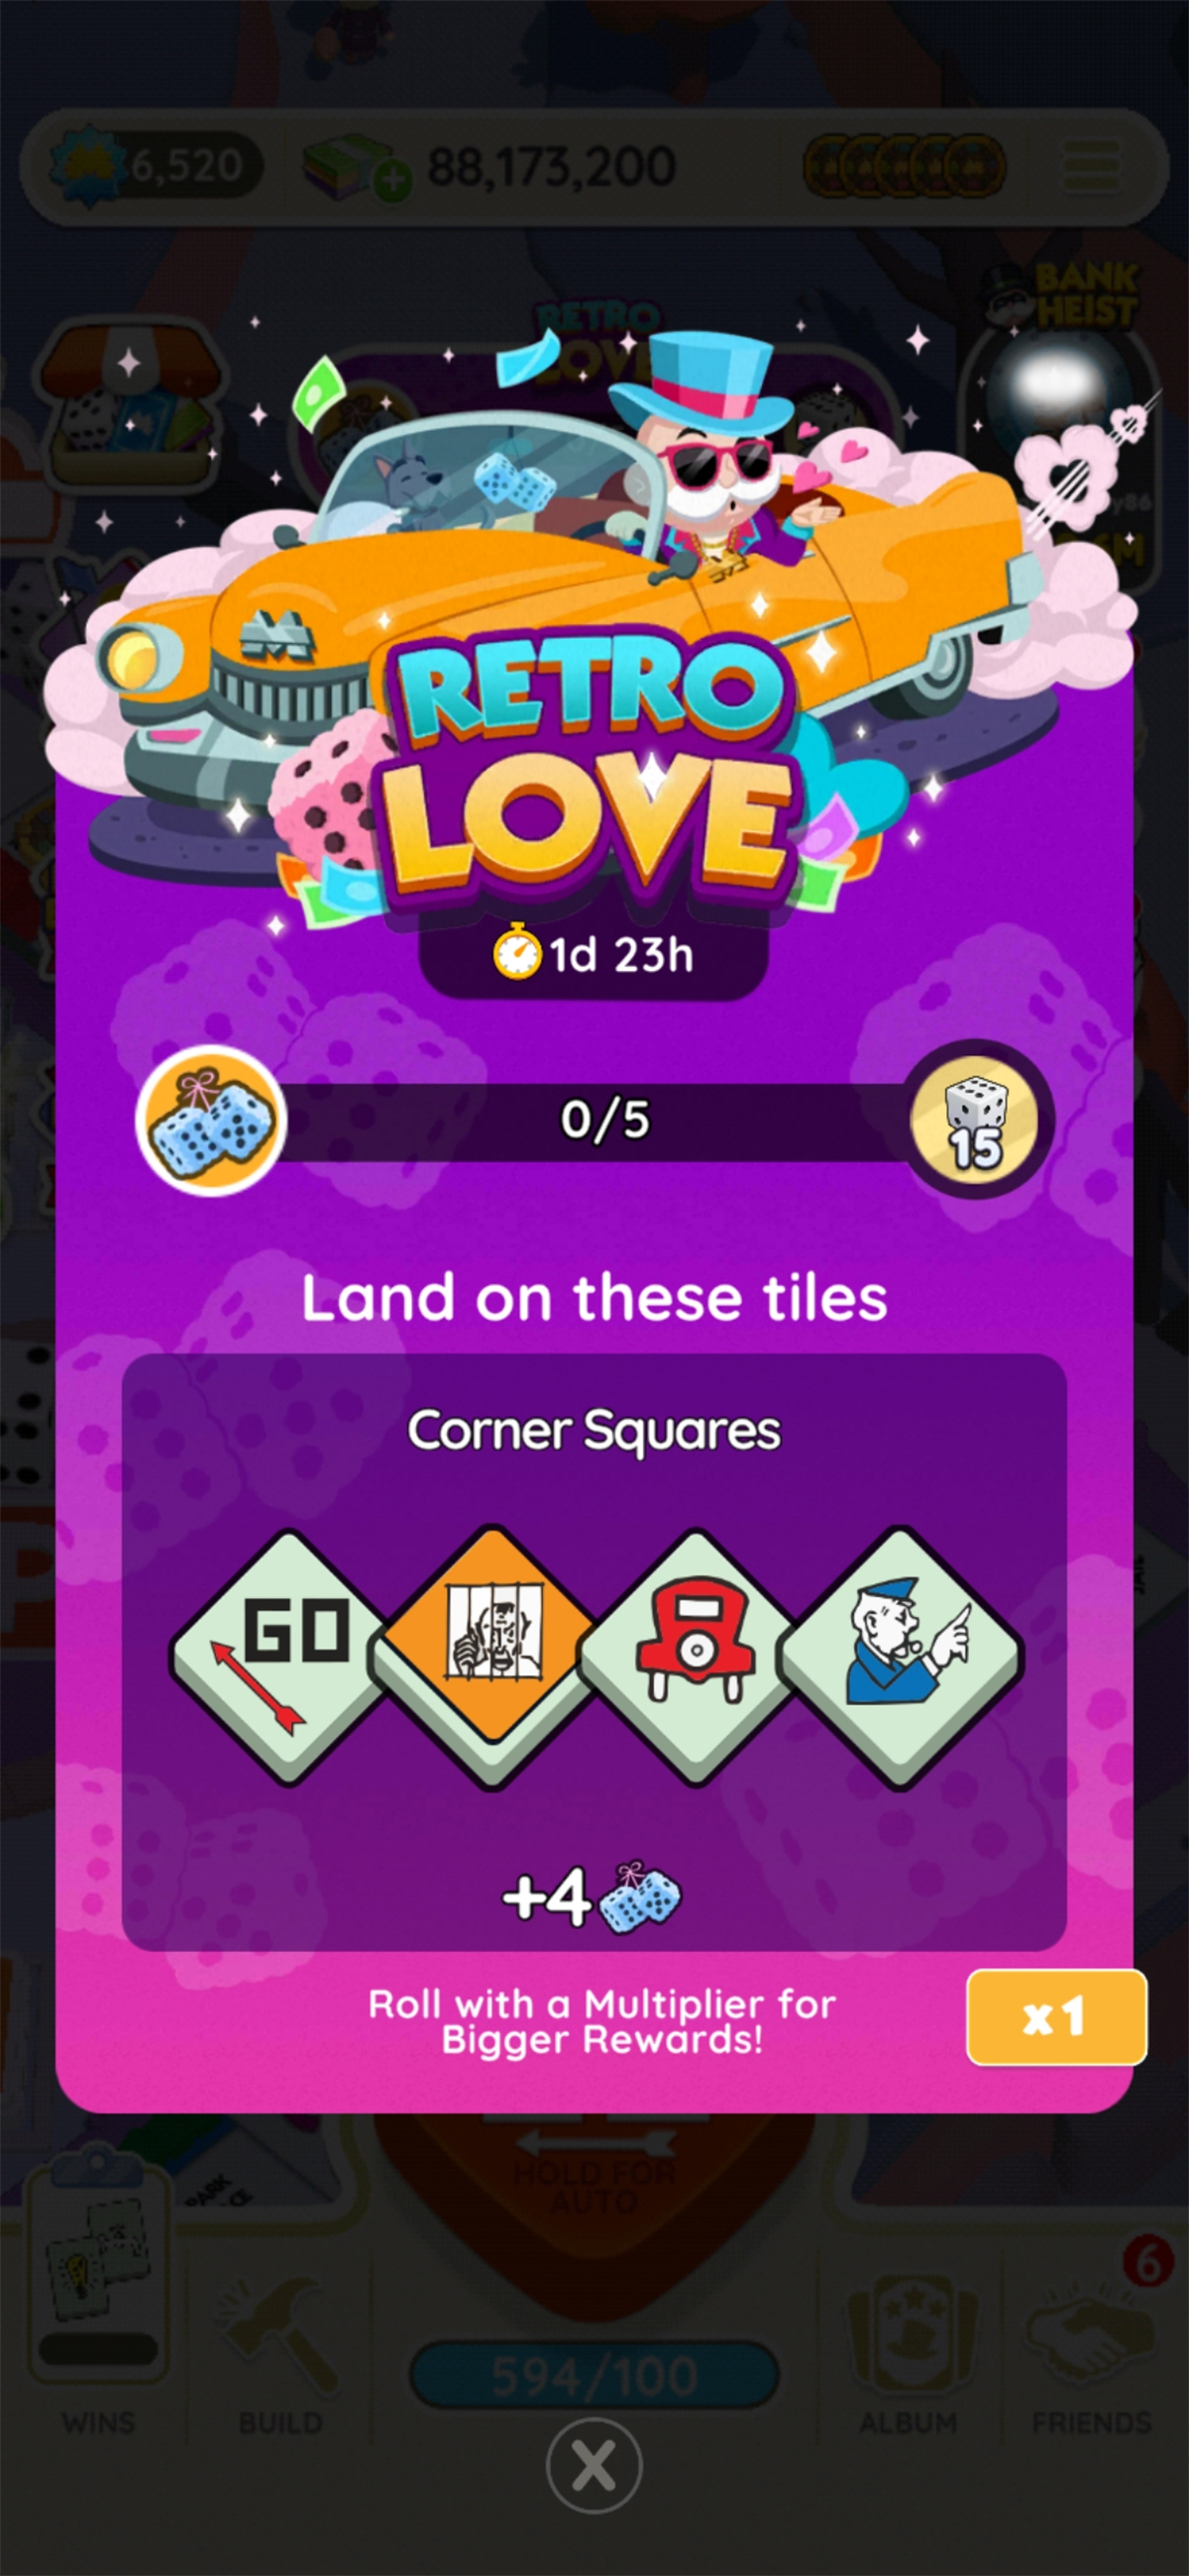 An image for the Retro Love event showing Mr. Monopoly in a fancy car above the logo for the event. The image is part of an article on all the rewards and milestones you can get in the Retro Love event in Monopoly GO, listed.